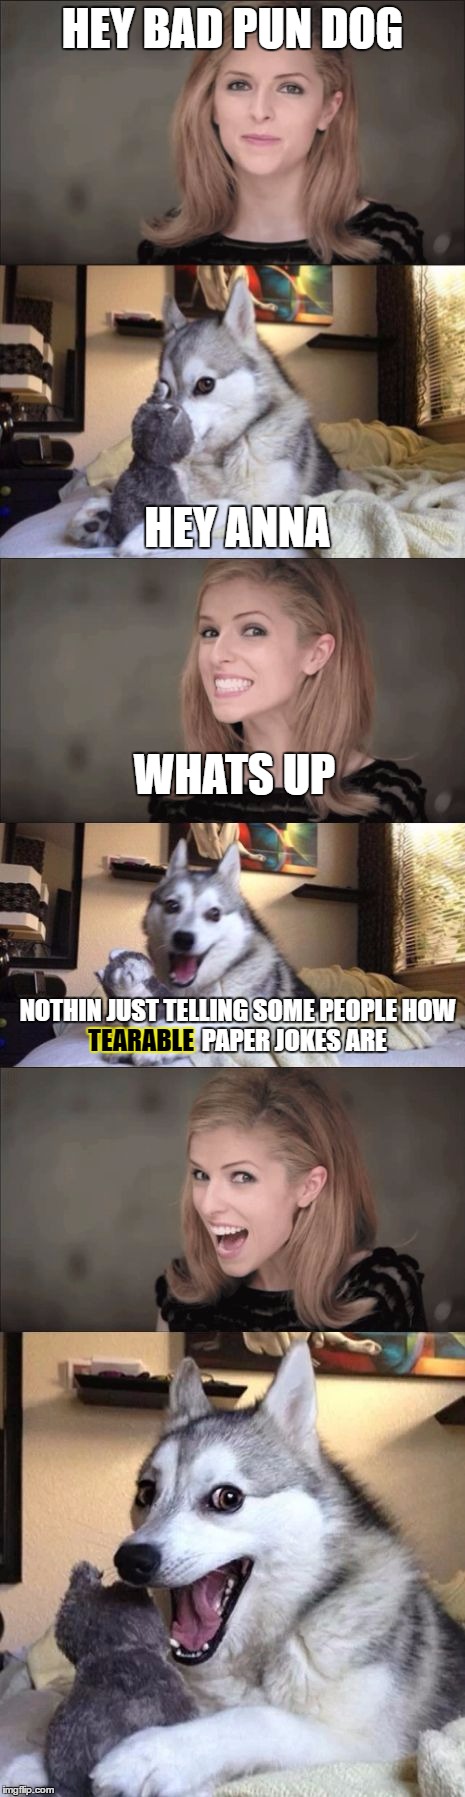 Anna and Bad Pun Dog Work Together | HEY BAD PUN DOG; HEY ANNA; WHATS UP; NOTHIN JUST TELLING SOME PEOPLE HOW                       PAPER JOKES ARE; TEARABLE | image tagged in anna and bad pun dog work together | made w/ Imgflip meme maker